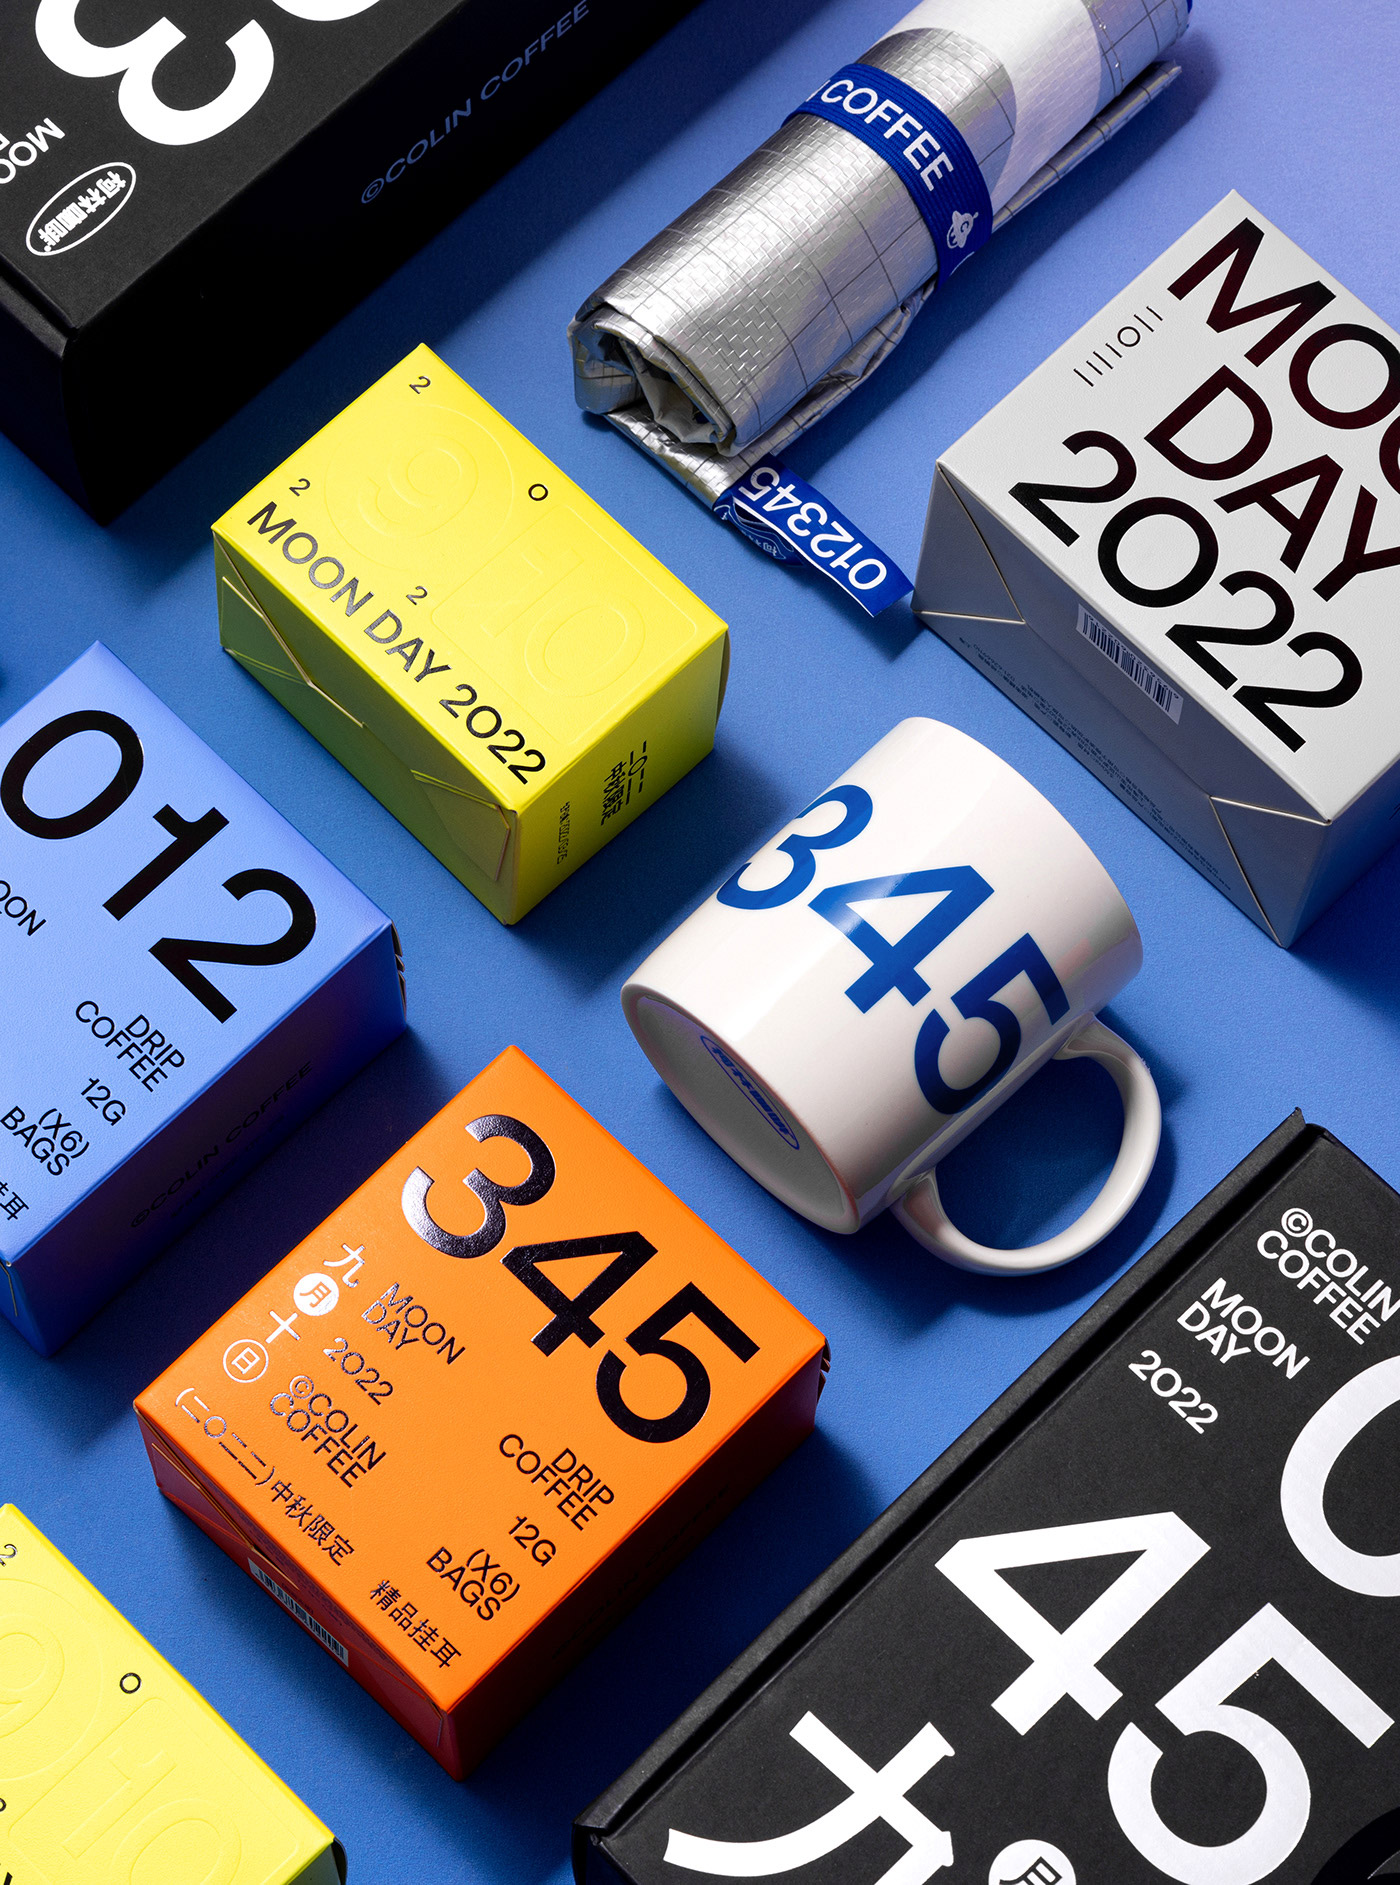 Colin Coffee - limited edition packaging design by Reesaw Studio